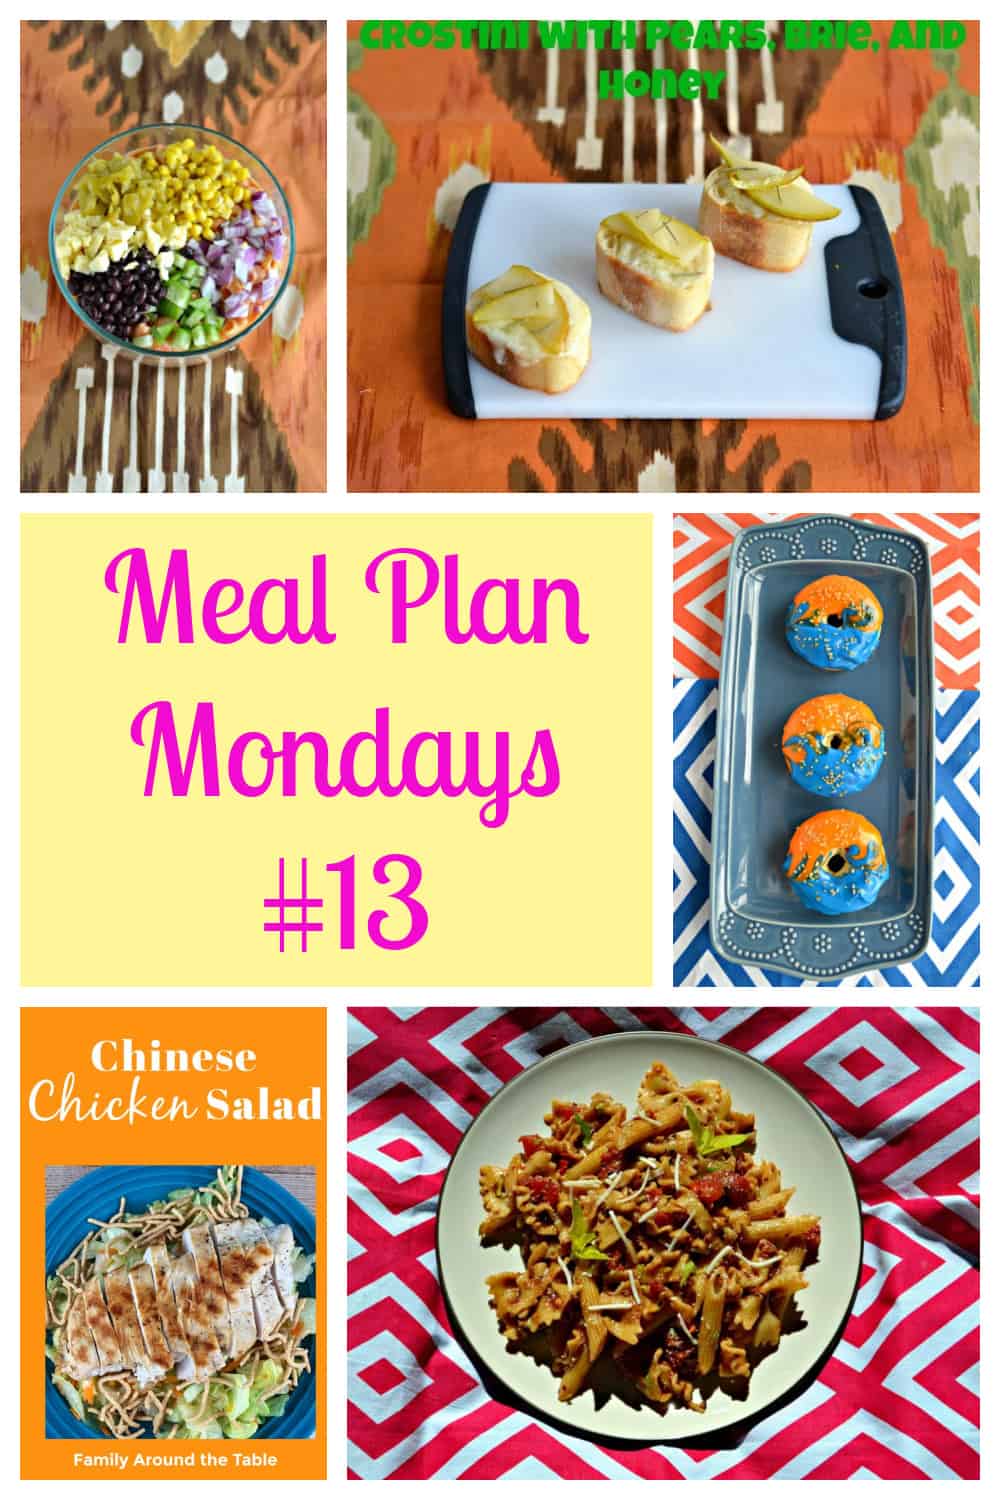 Meal Plan Mondays #13: Easy Recipes for Weeknight Meals